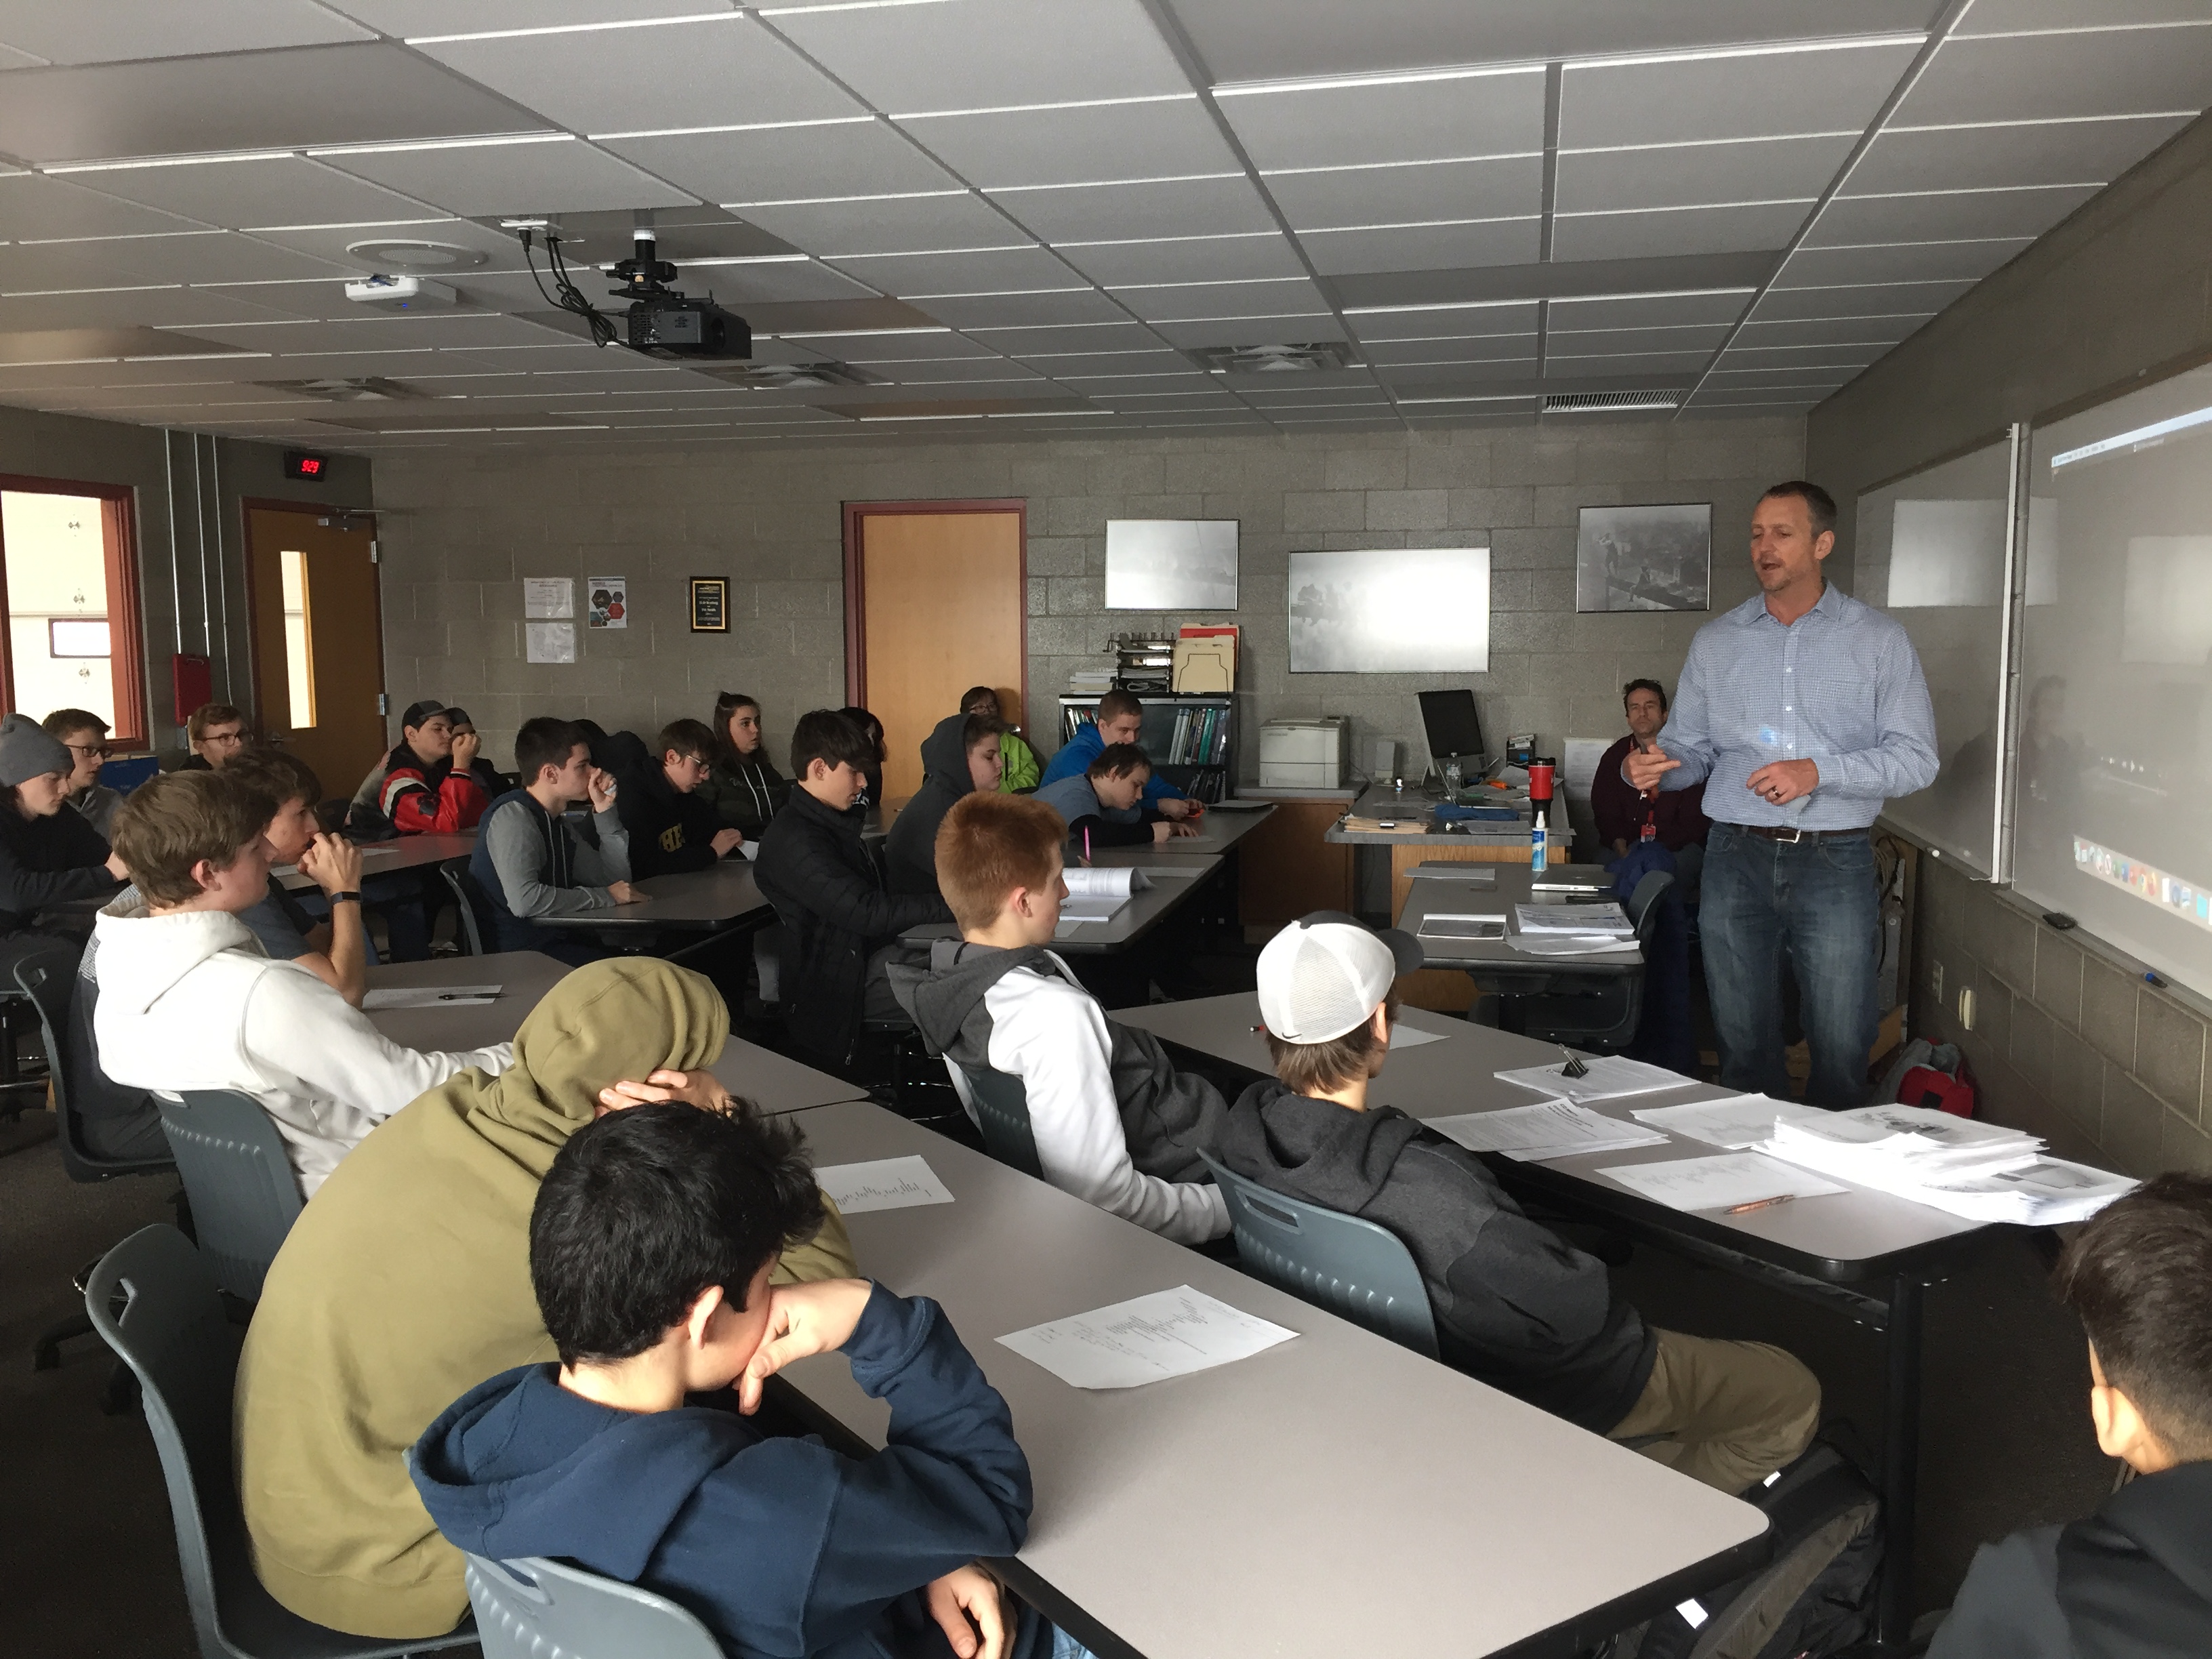 Recently, C.D. Smith's Senior Project Manager, Joe Van Handel, spent three days connecting and engaging with over 70 students from the ACE Academy at the Fond du Lac High School.